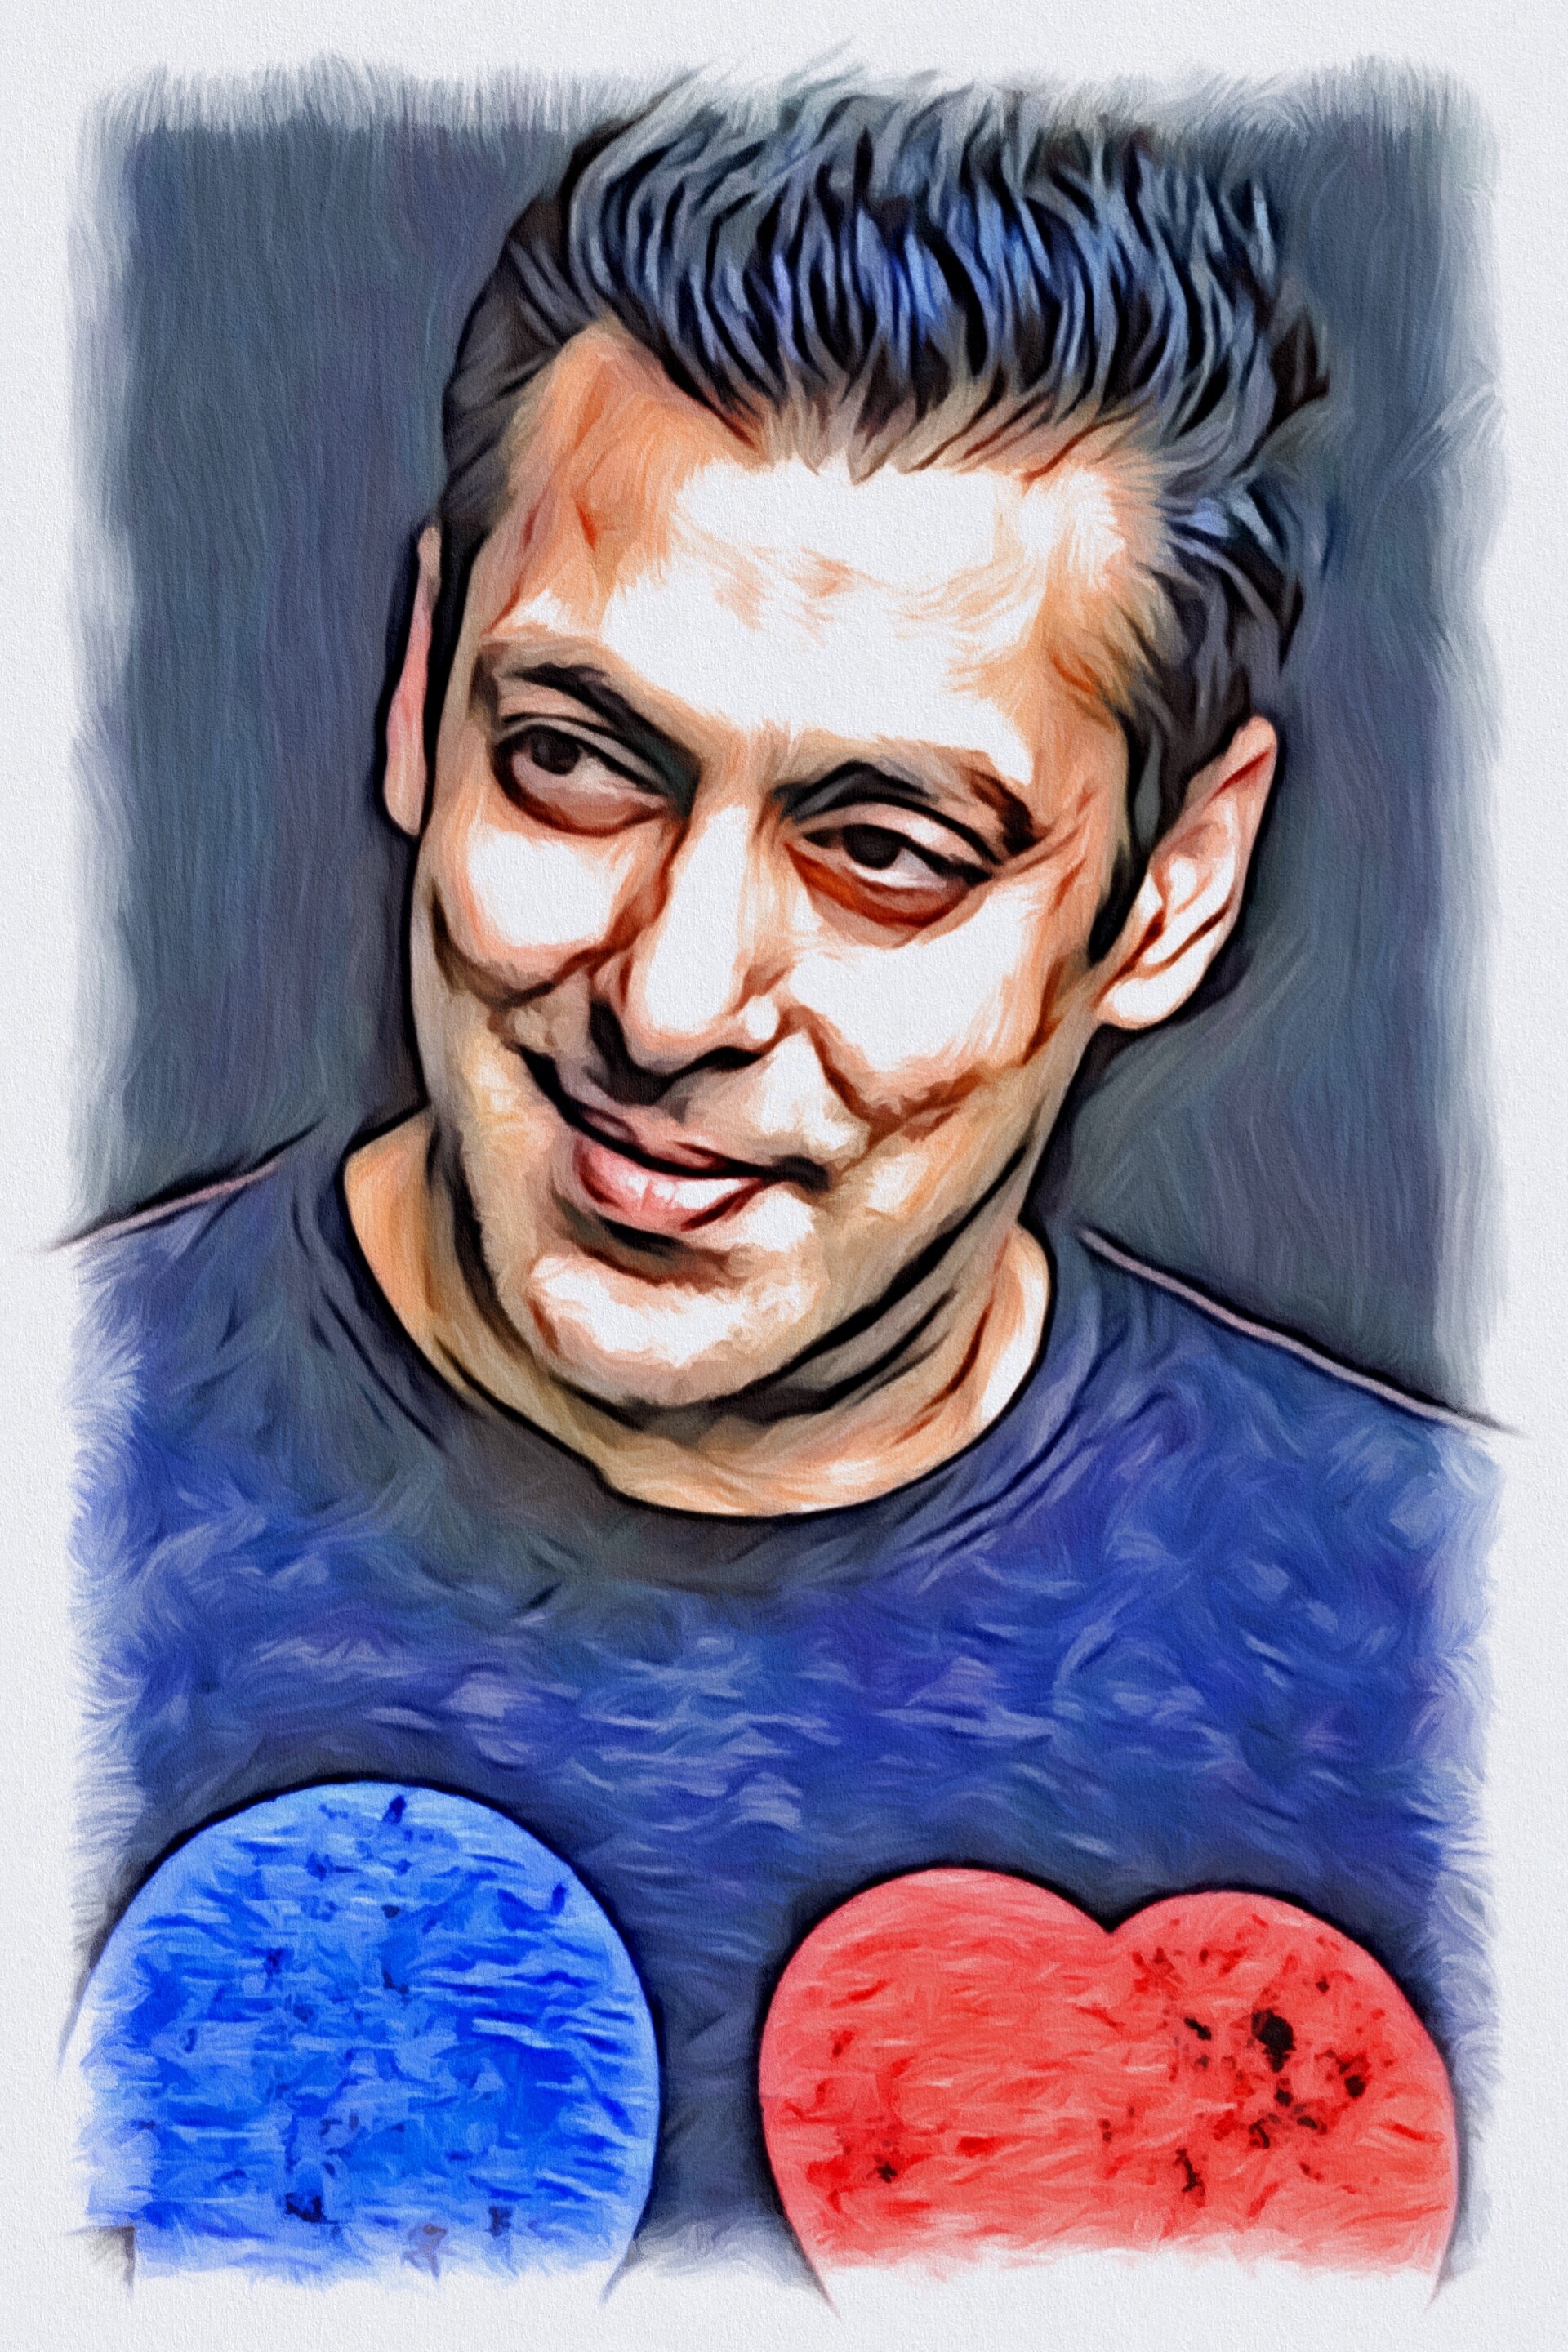 Poster Salman Khan sl12254 (Wall Poster, 13x19 Inches, Multicolor) Fine Art  Print - Art & Paintings posters in India - Buy art, film, design, movie,  music, nature and educational paintings/wallpapers at Flipkart.com